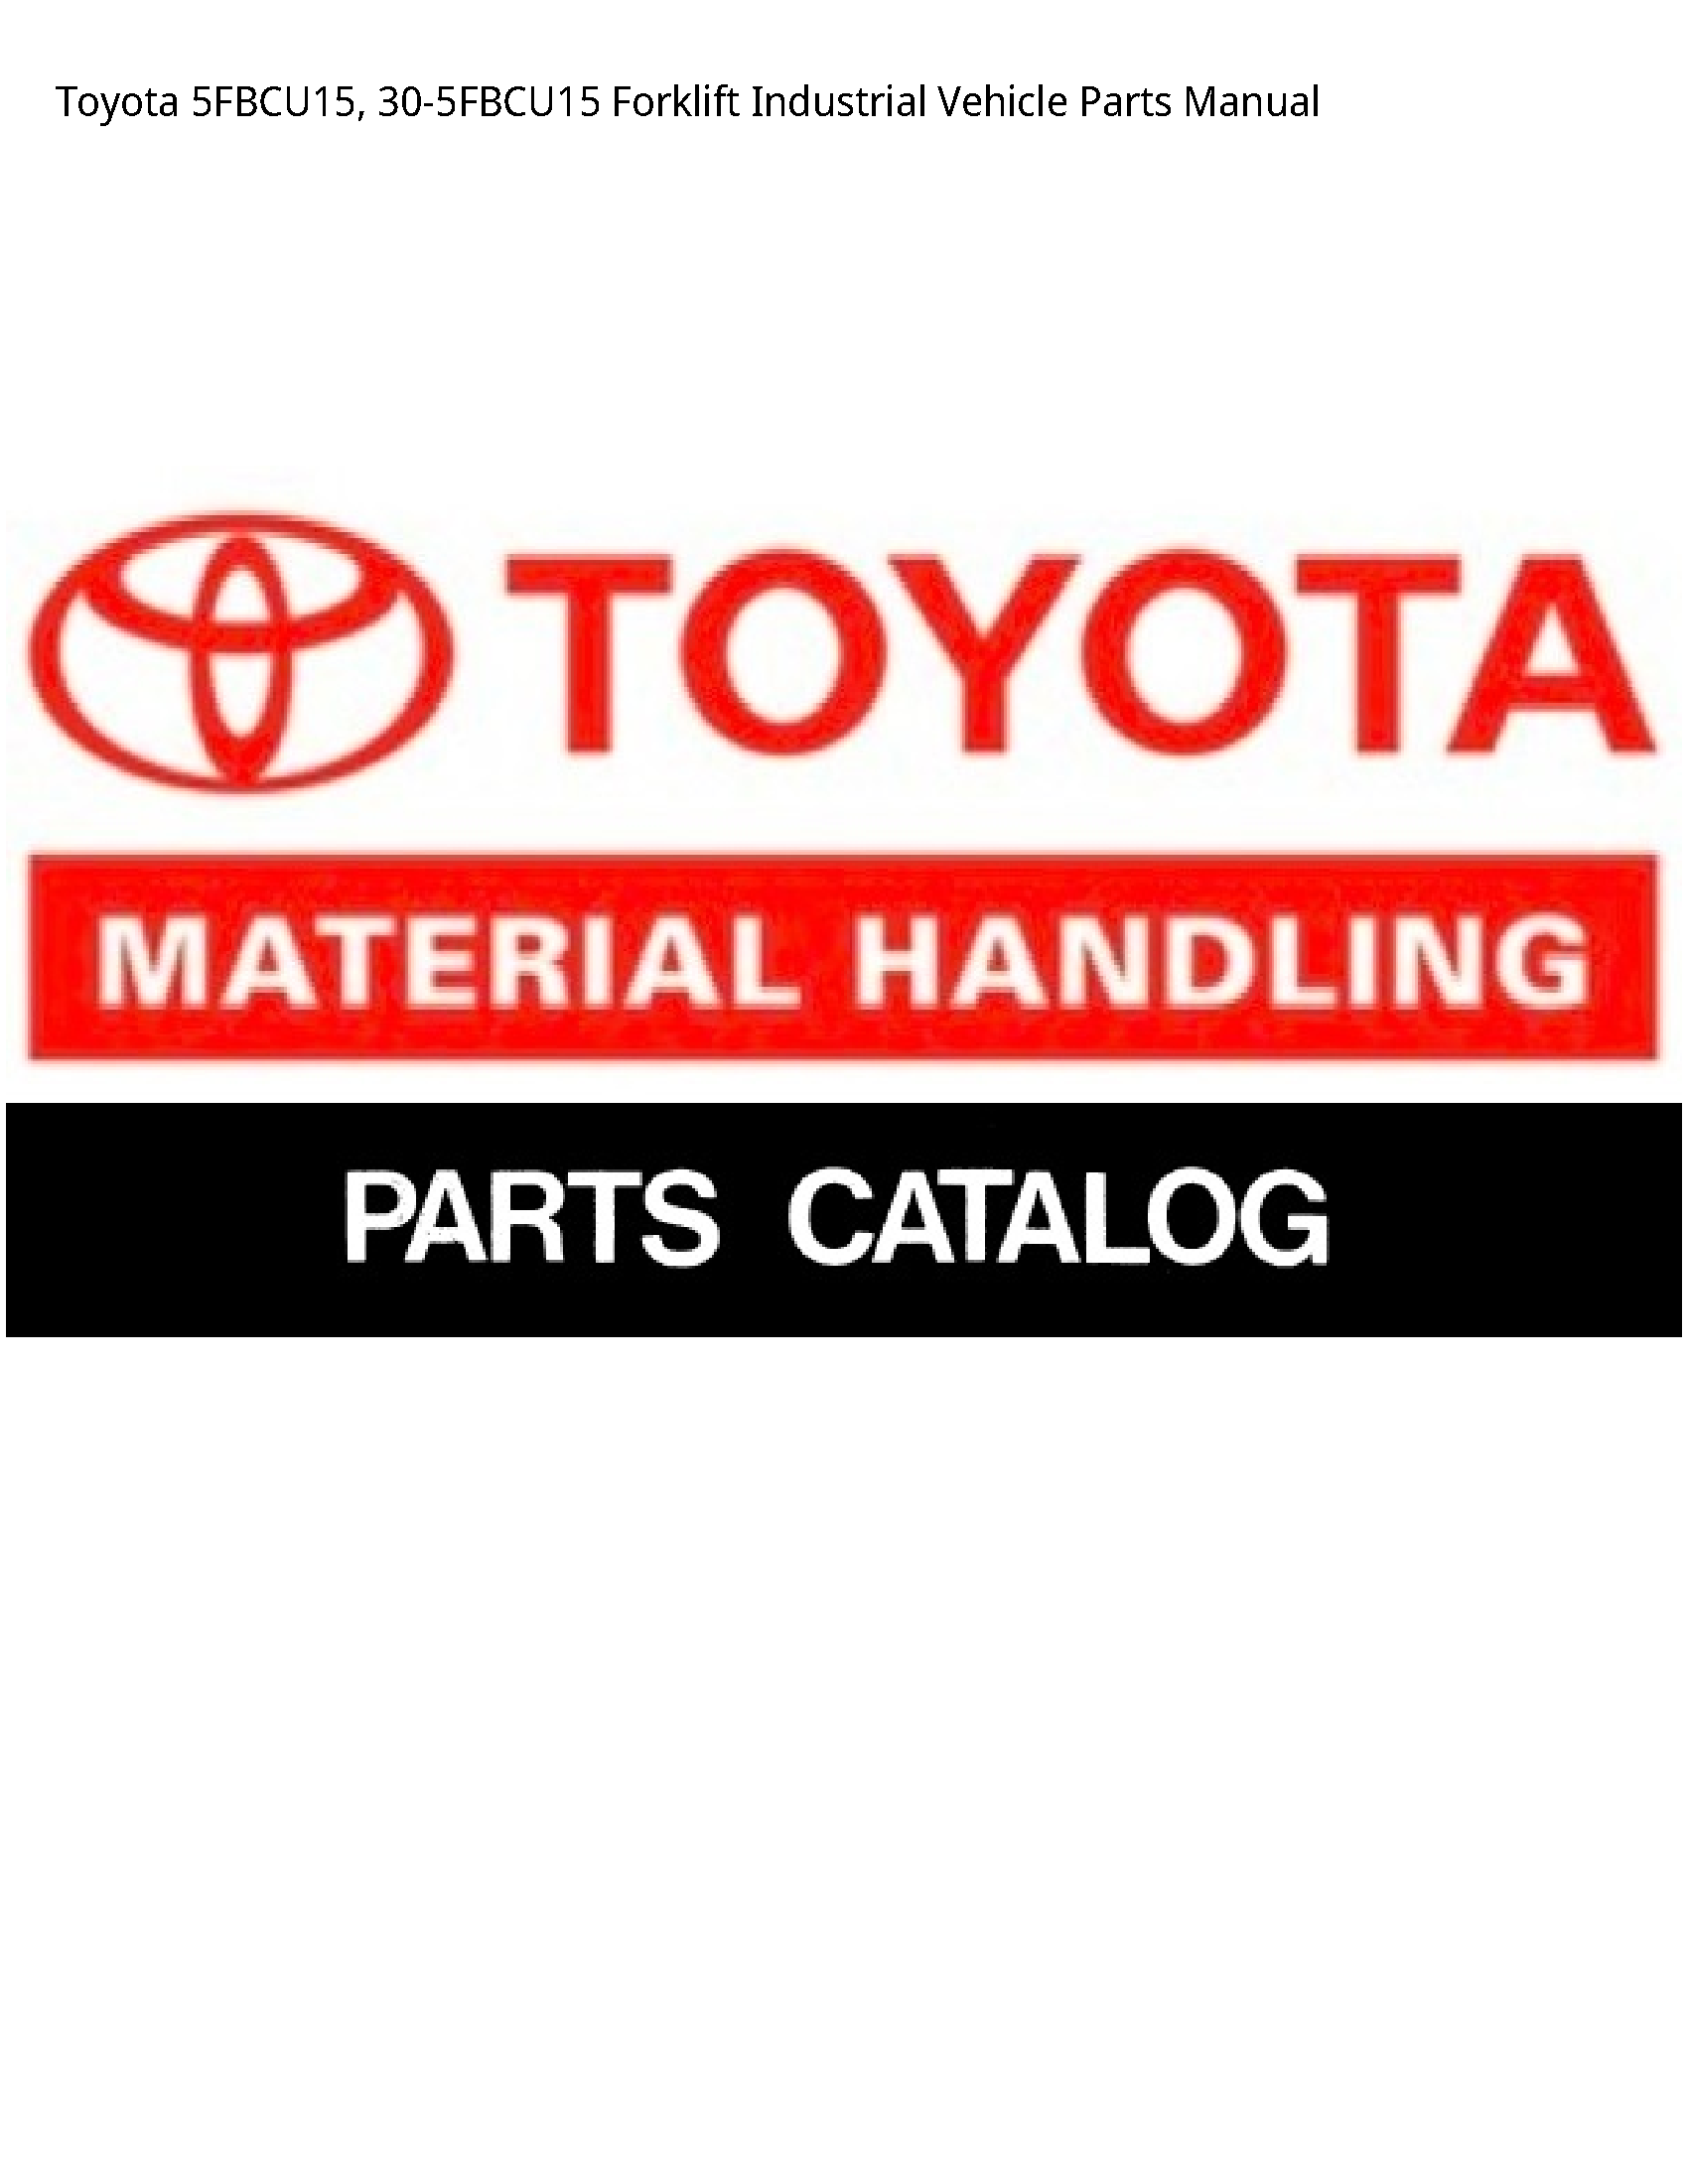 Toyota 5FBCU15 Forklift Industrial Vehicle Parts manual